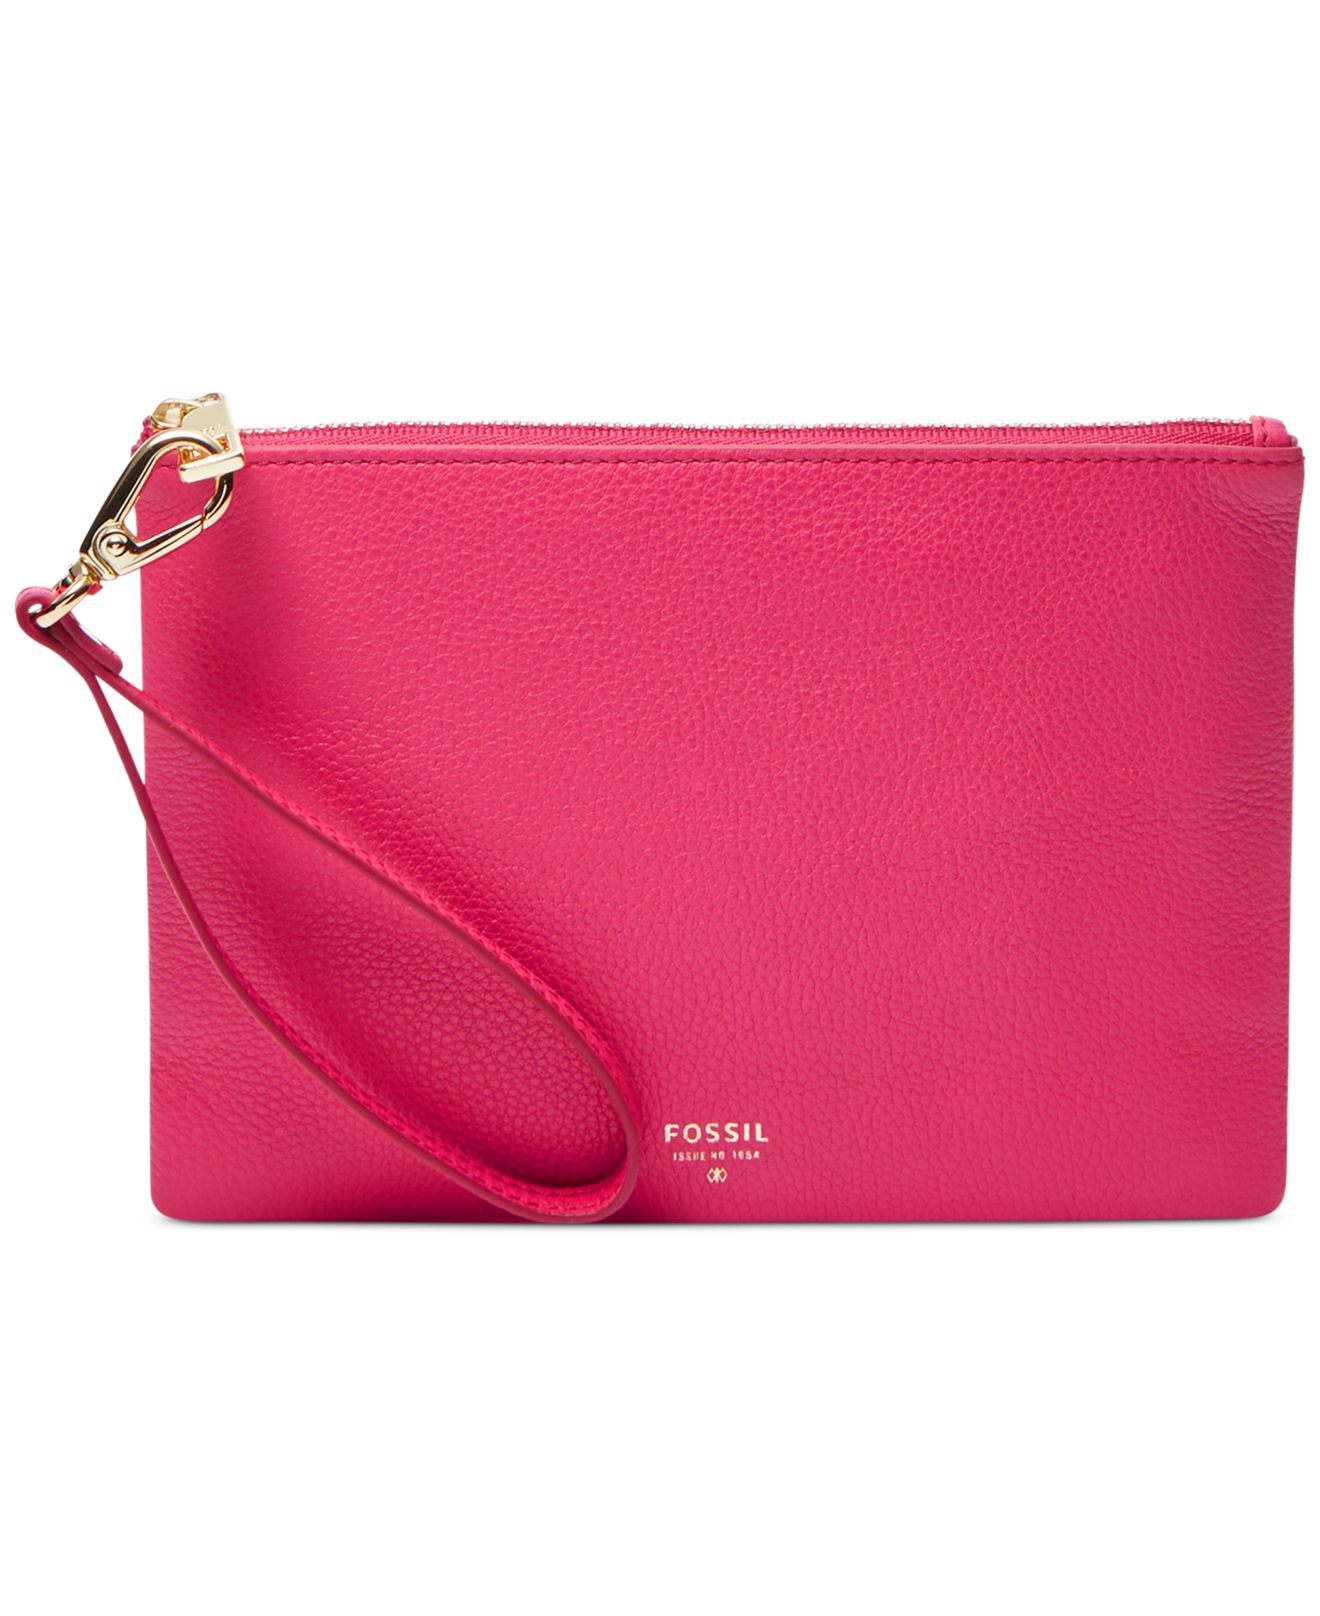 Fossil Small Leather Wristlet in Pink (Pomegranate) - Save 46% | Lyst